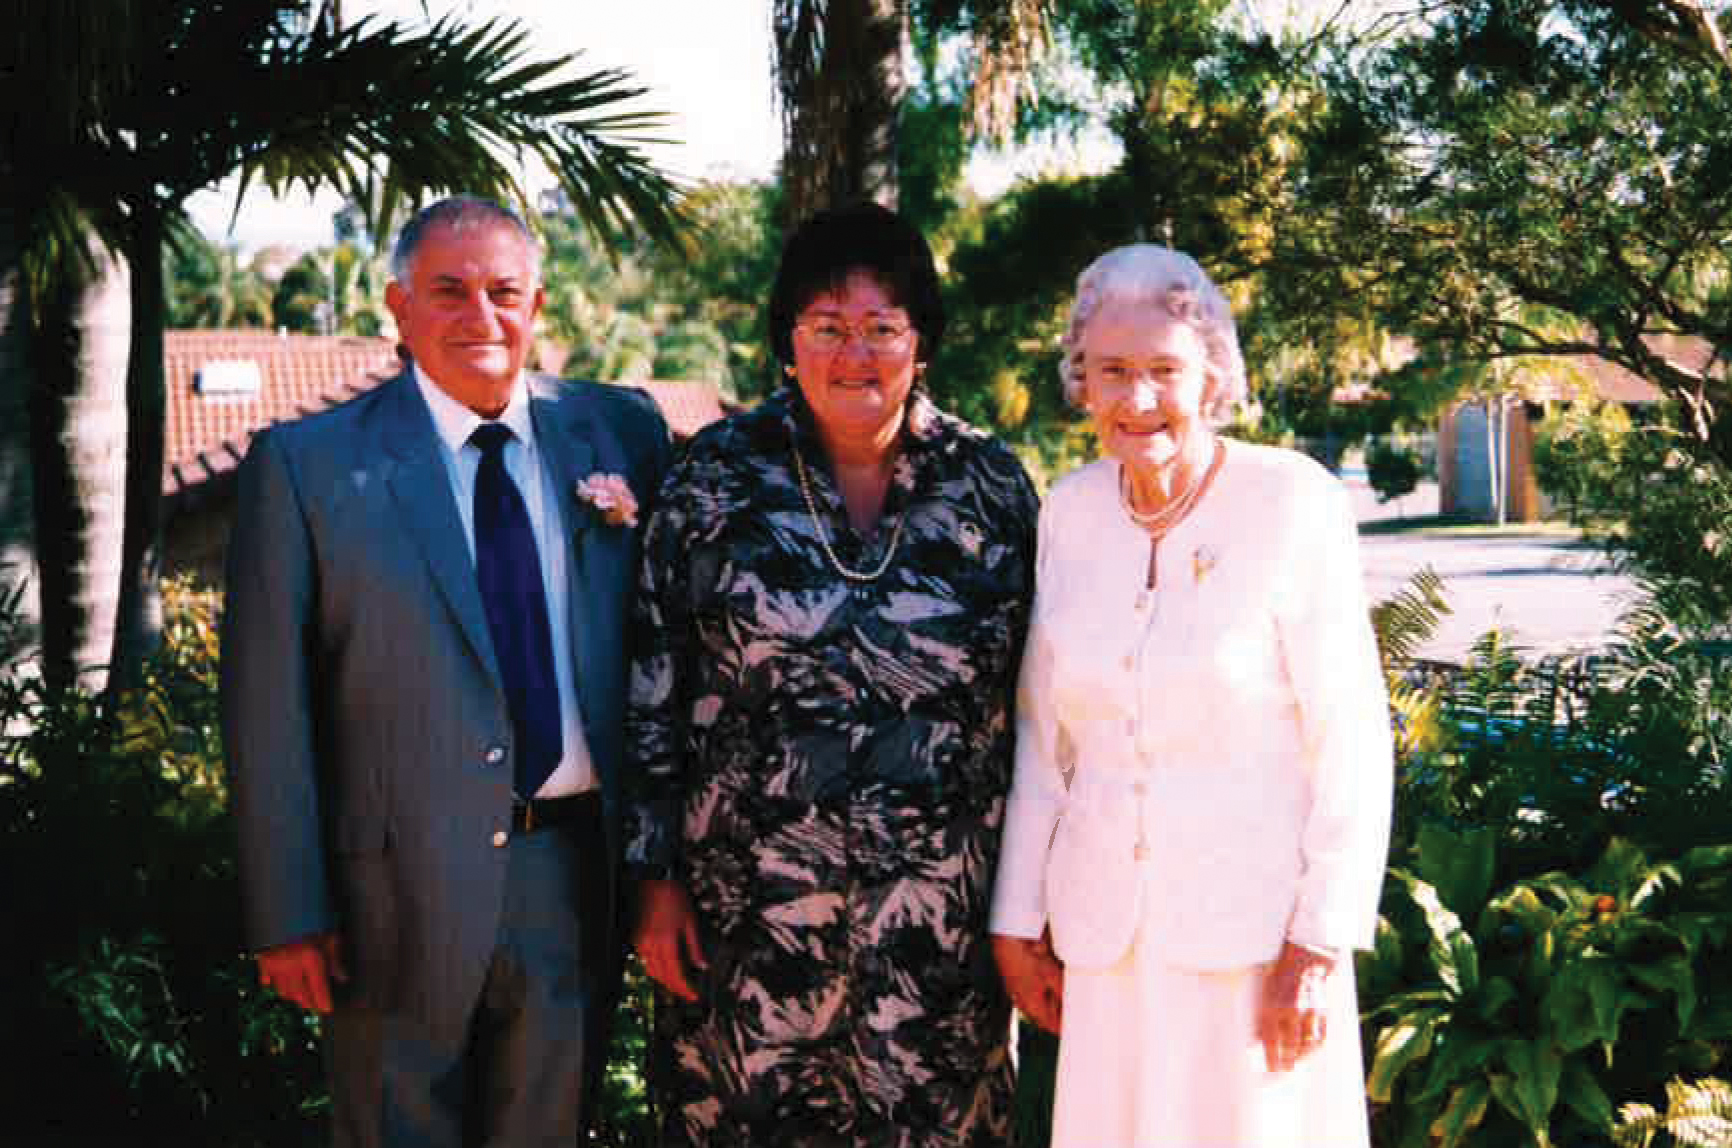 Les, Anne and Maureen.